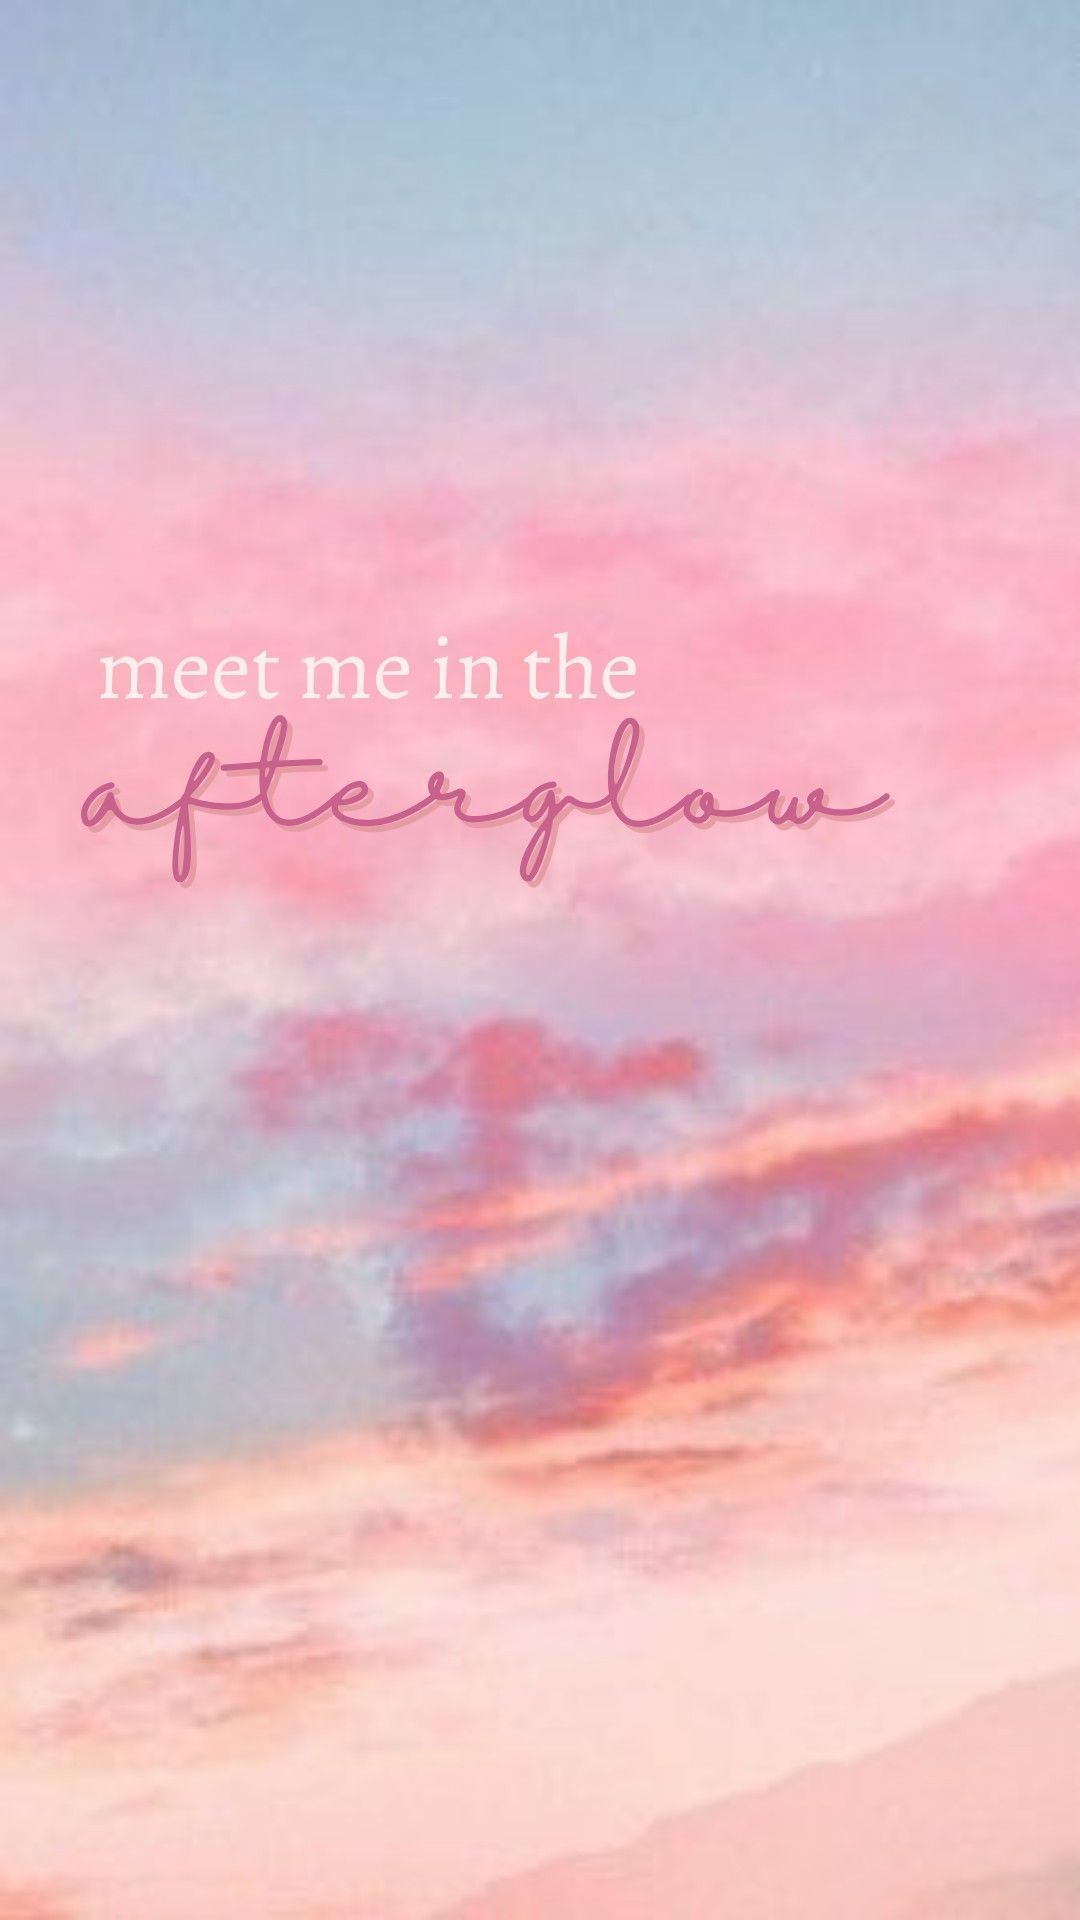 Meet me in the afterglow - Taylor Swift